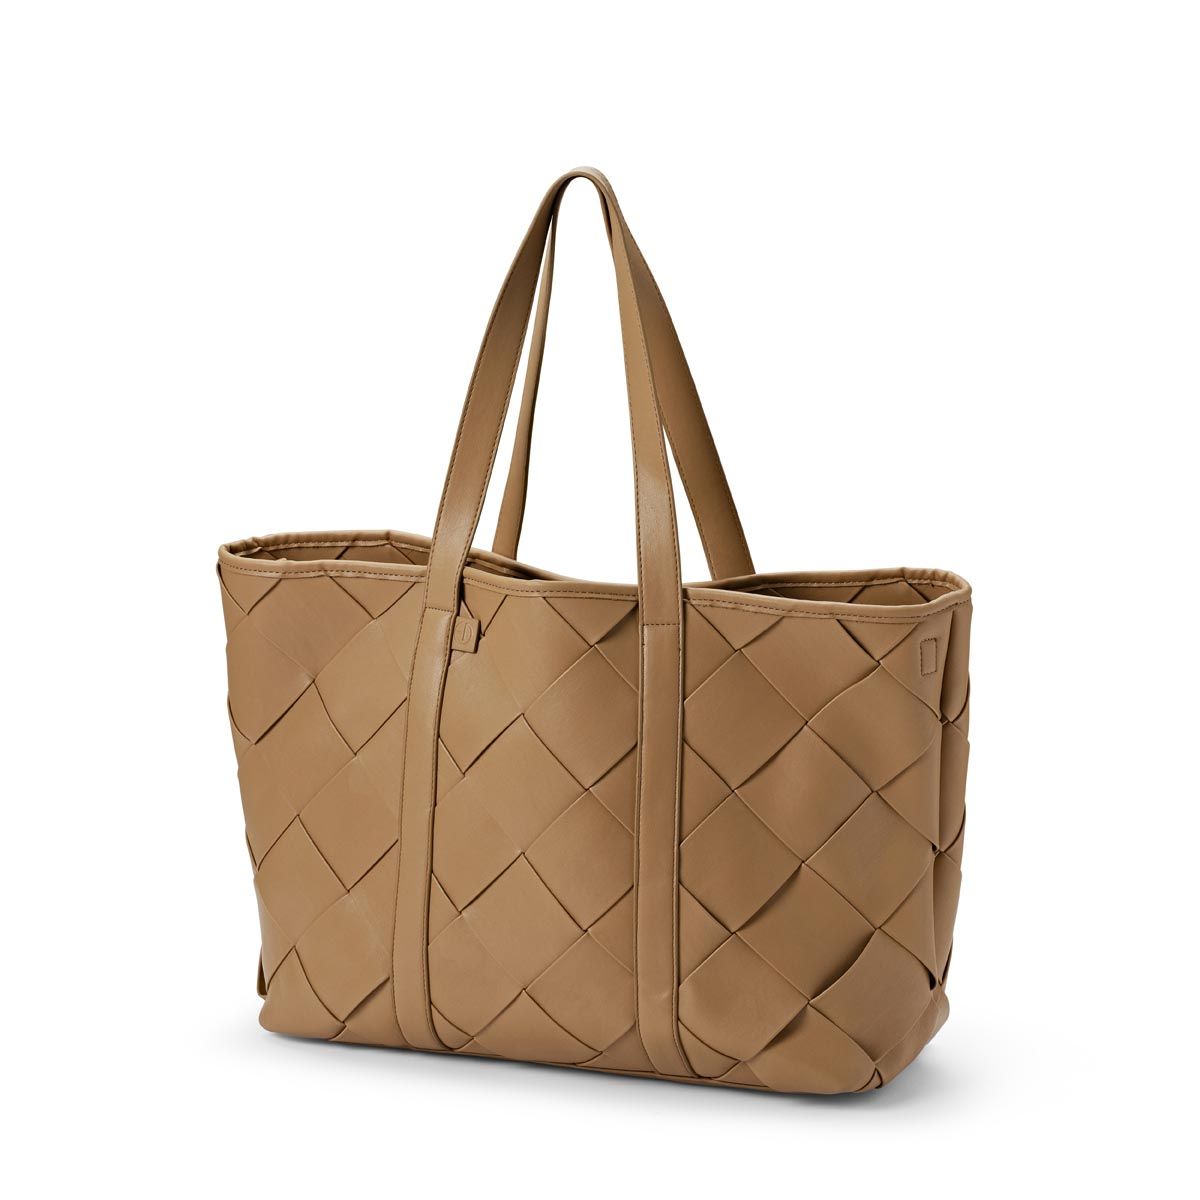 50670158139na-changing-bag-braided-caramel-brown-front-aw22-pp